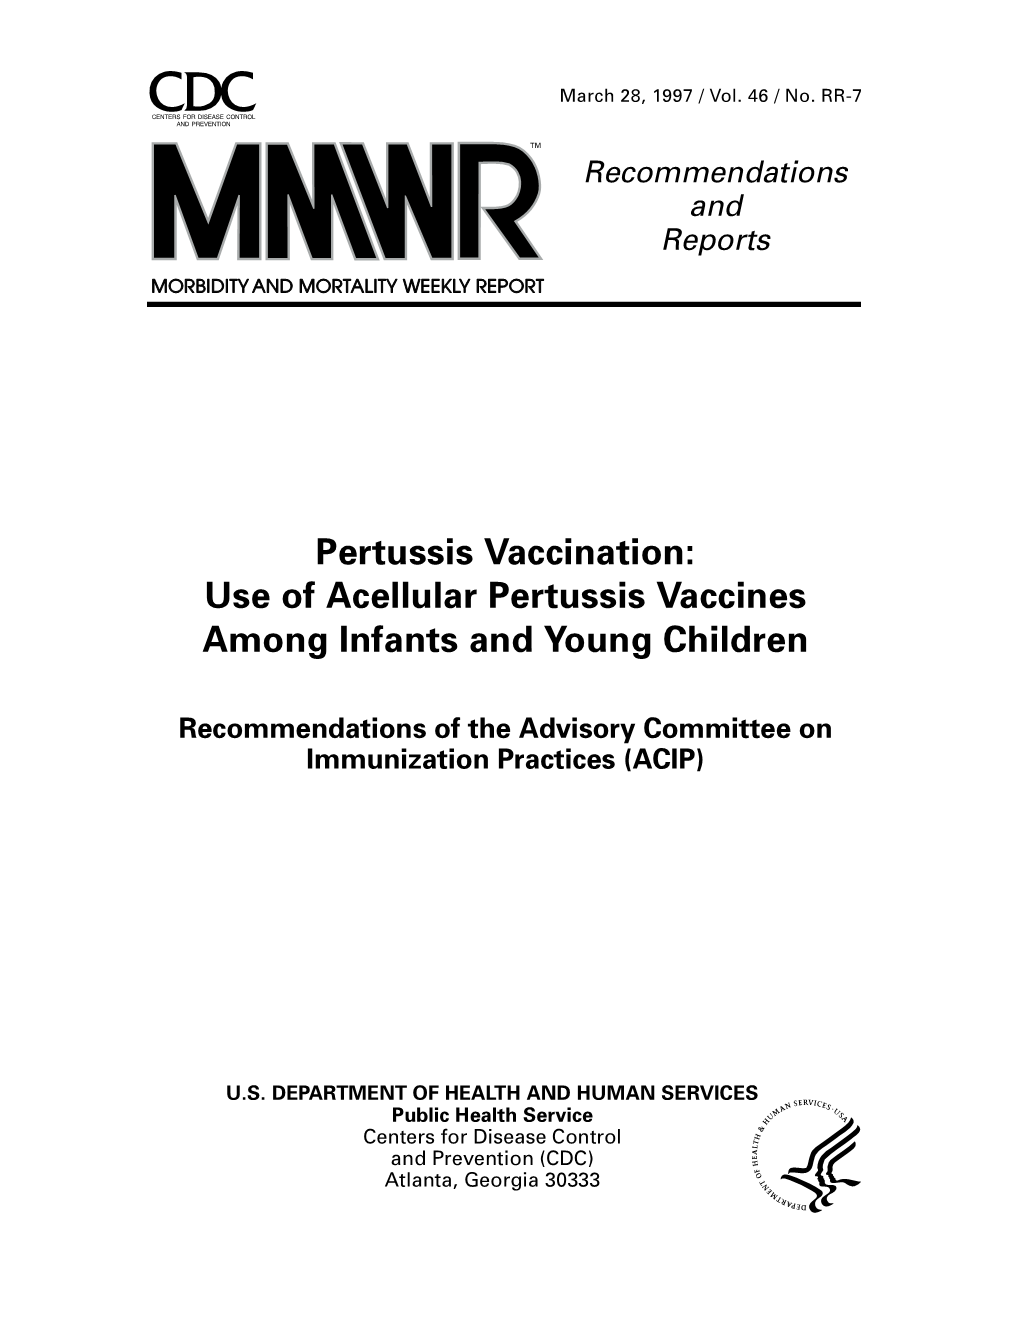 Pertussis Vaccination: Use of Acellular Pertussis Vaccines Among Infants and Young Children